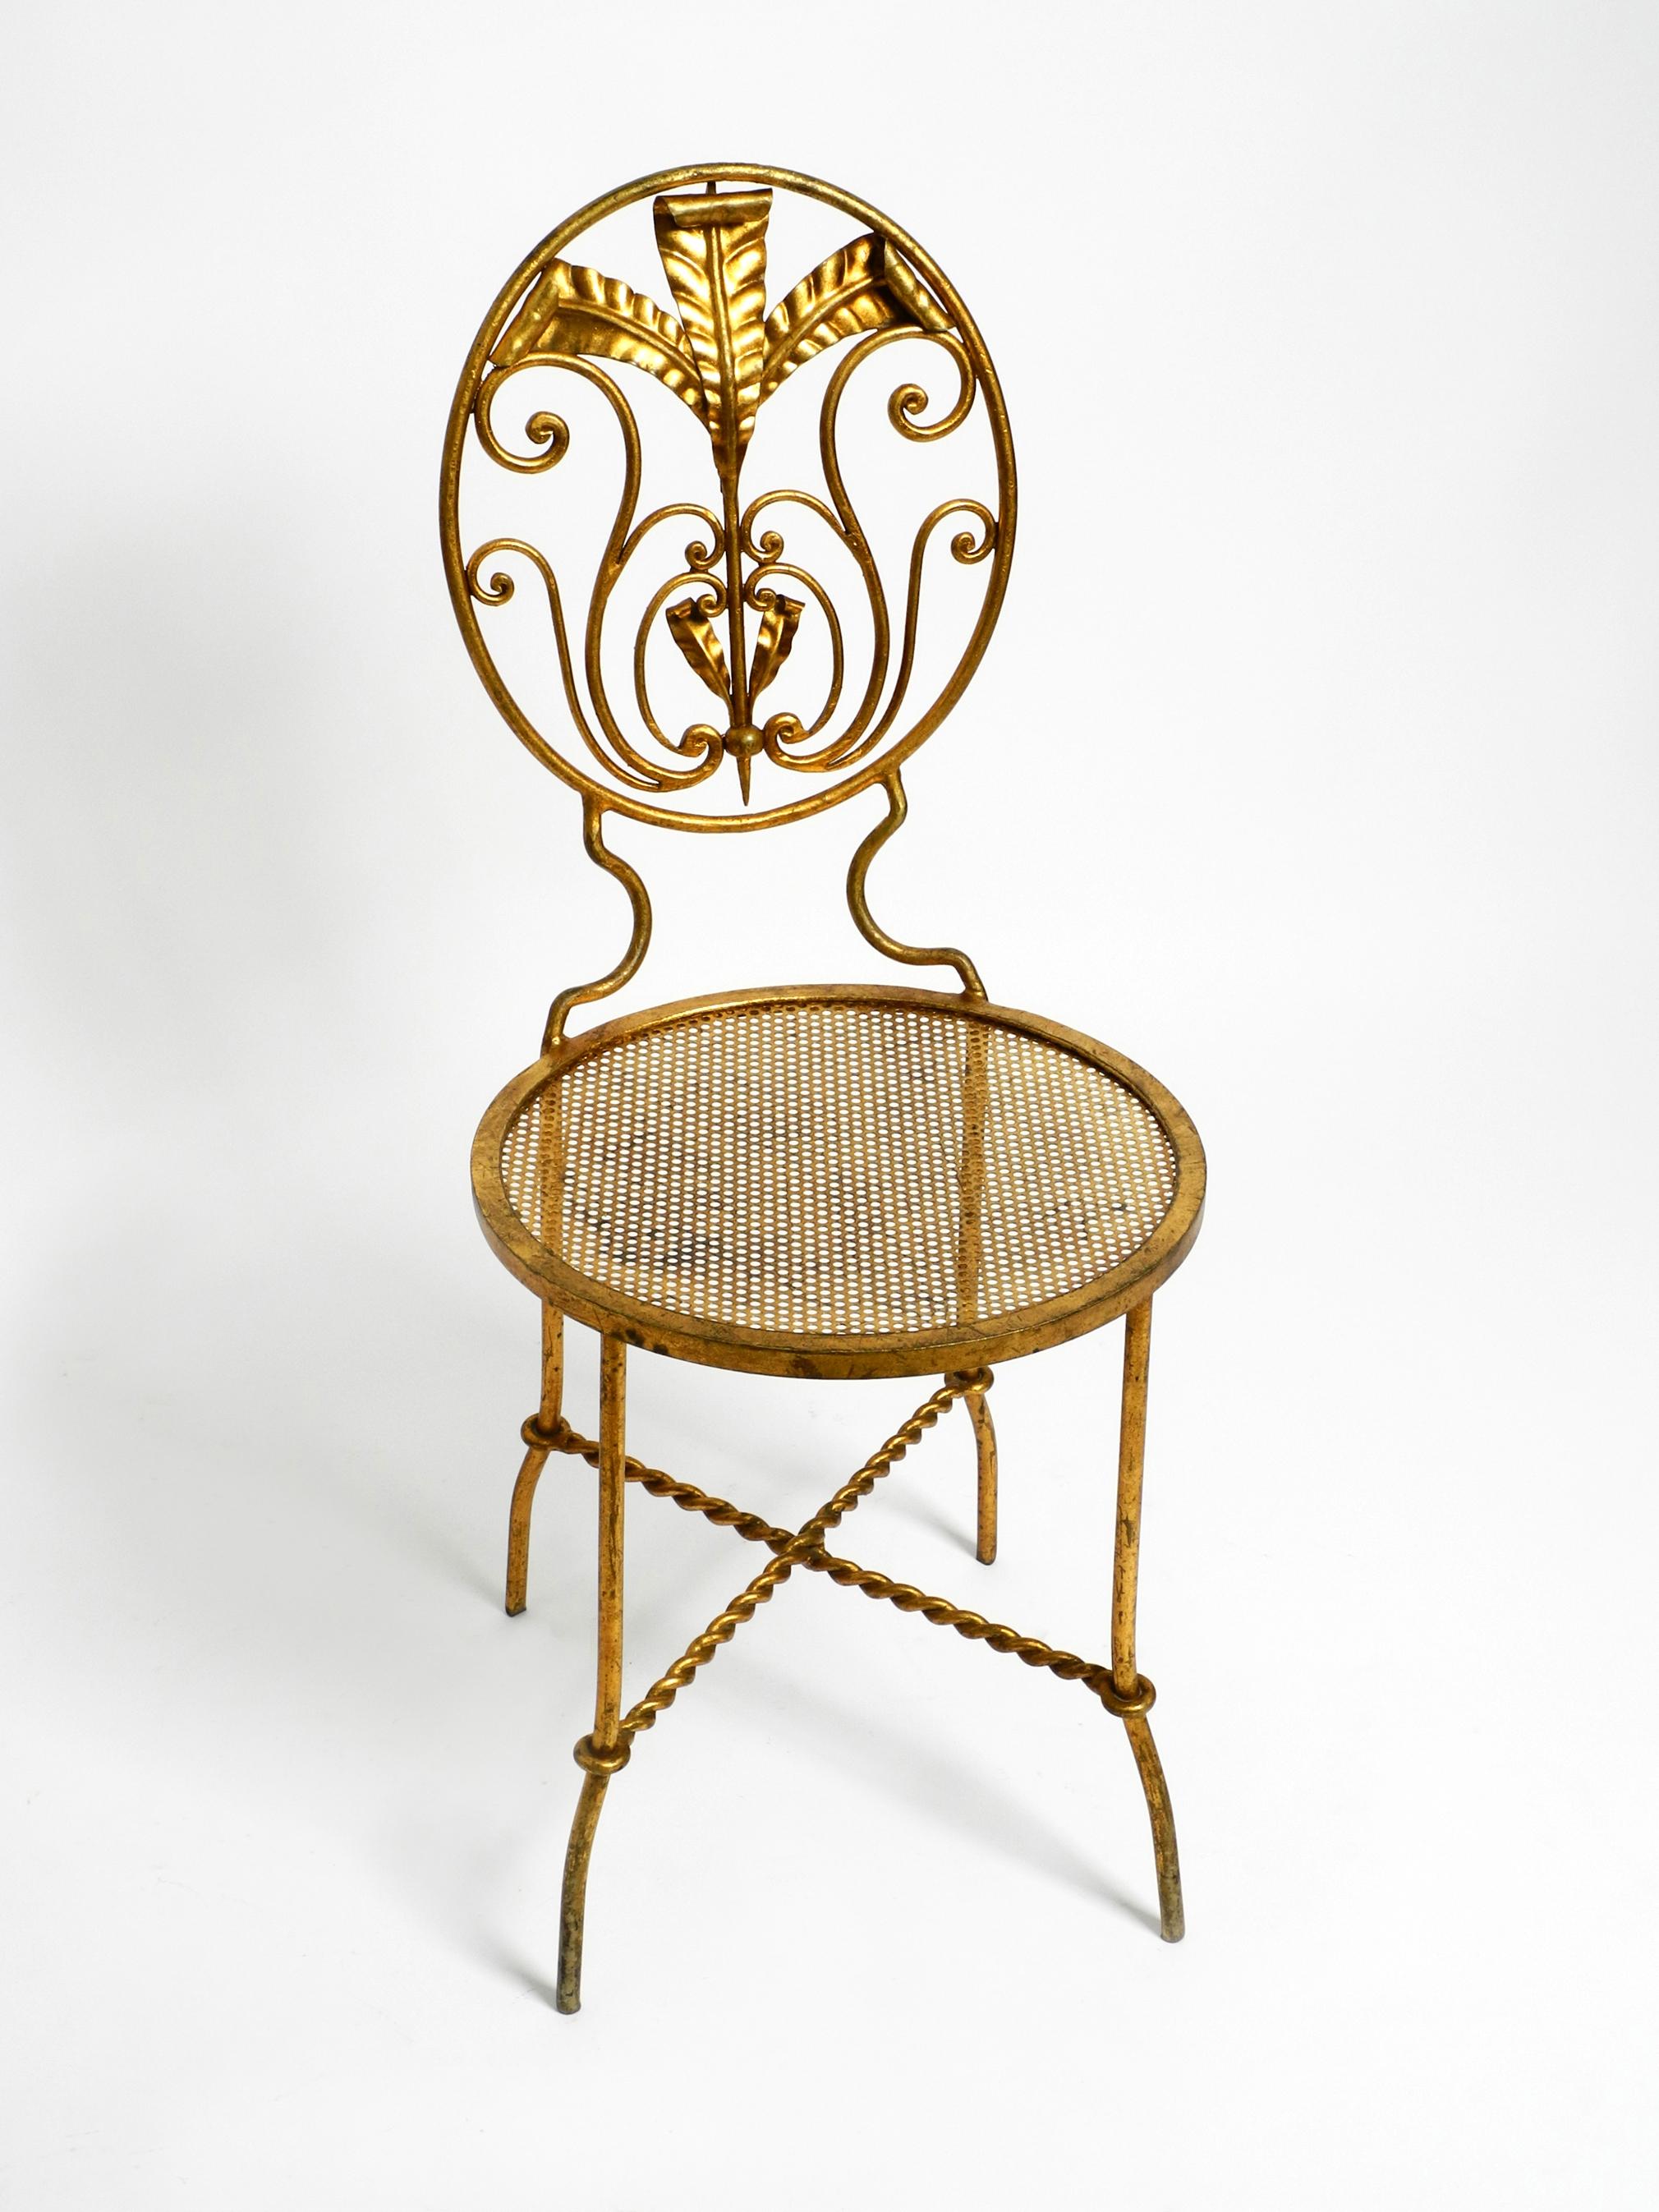 Beautiful 1970s Regency Design gold plated wrought and turned iron decorative florentine chair.
Great elaborate design with dreamlike patina. Made in Italy.
Very well preserved with no damages and not wobbly. All parts tight.
100% original